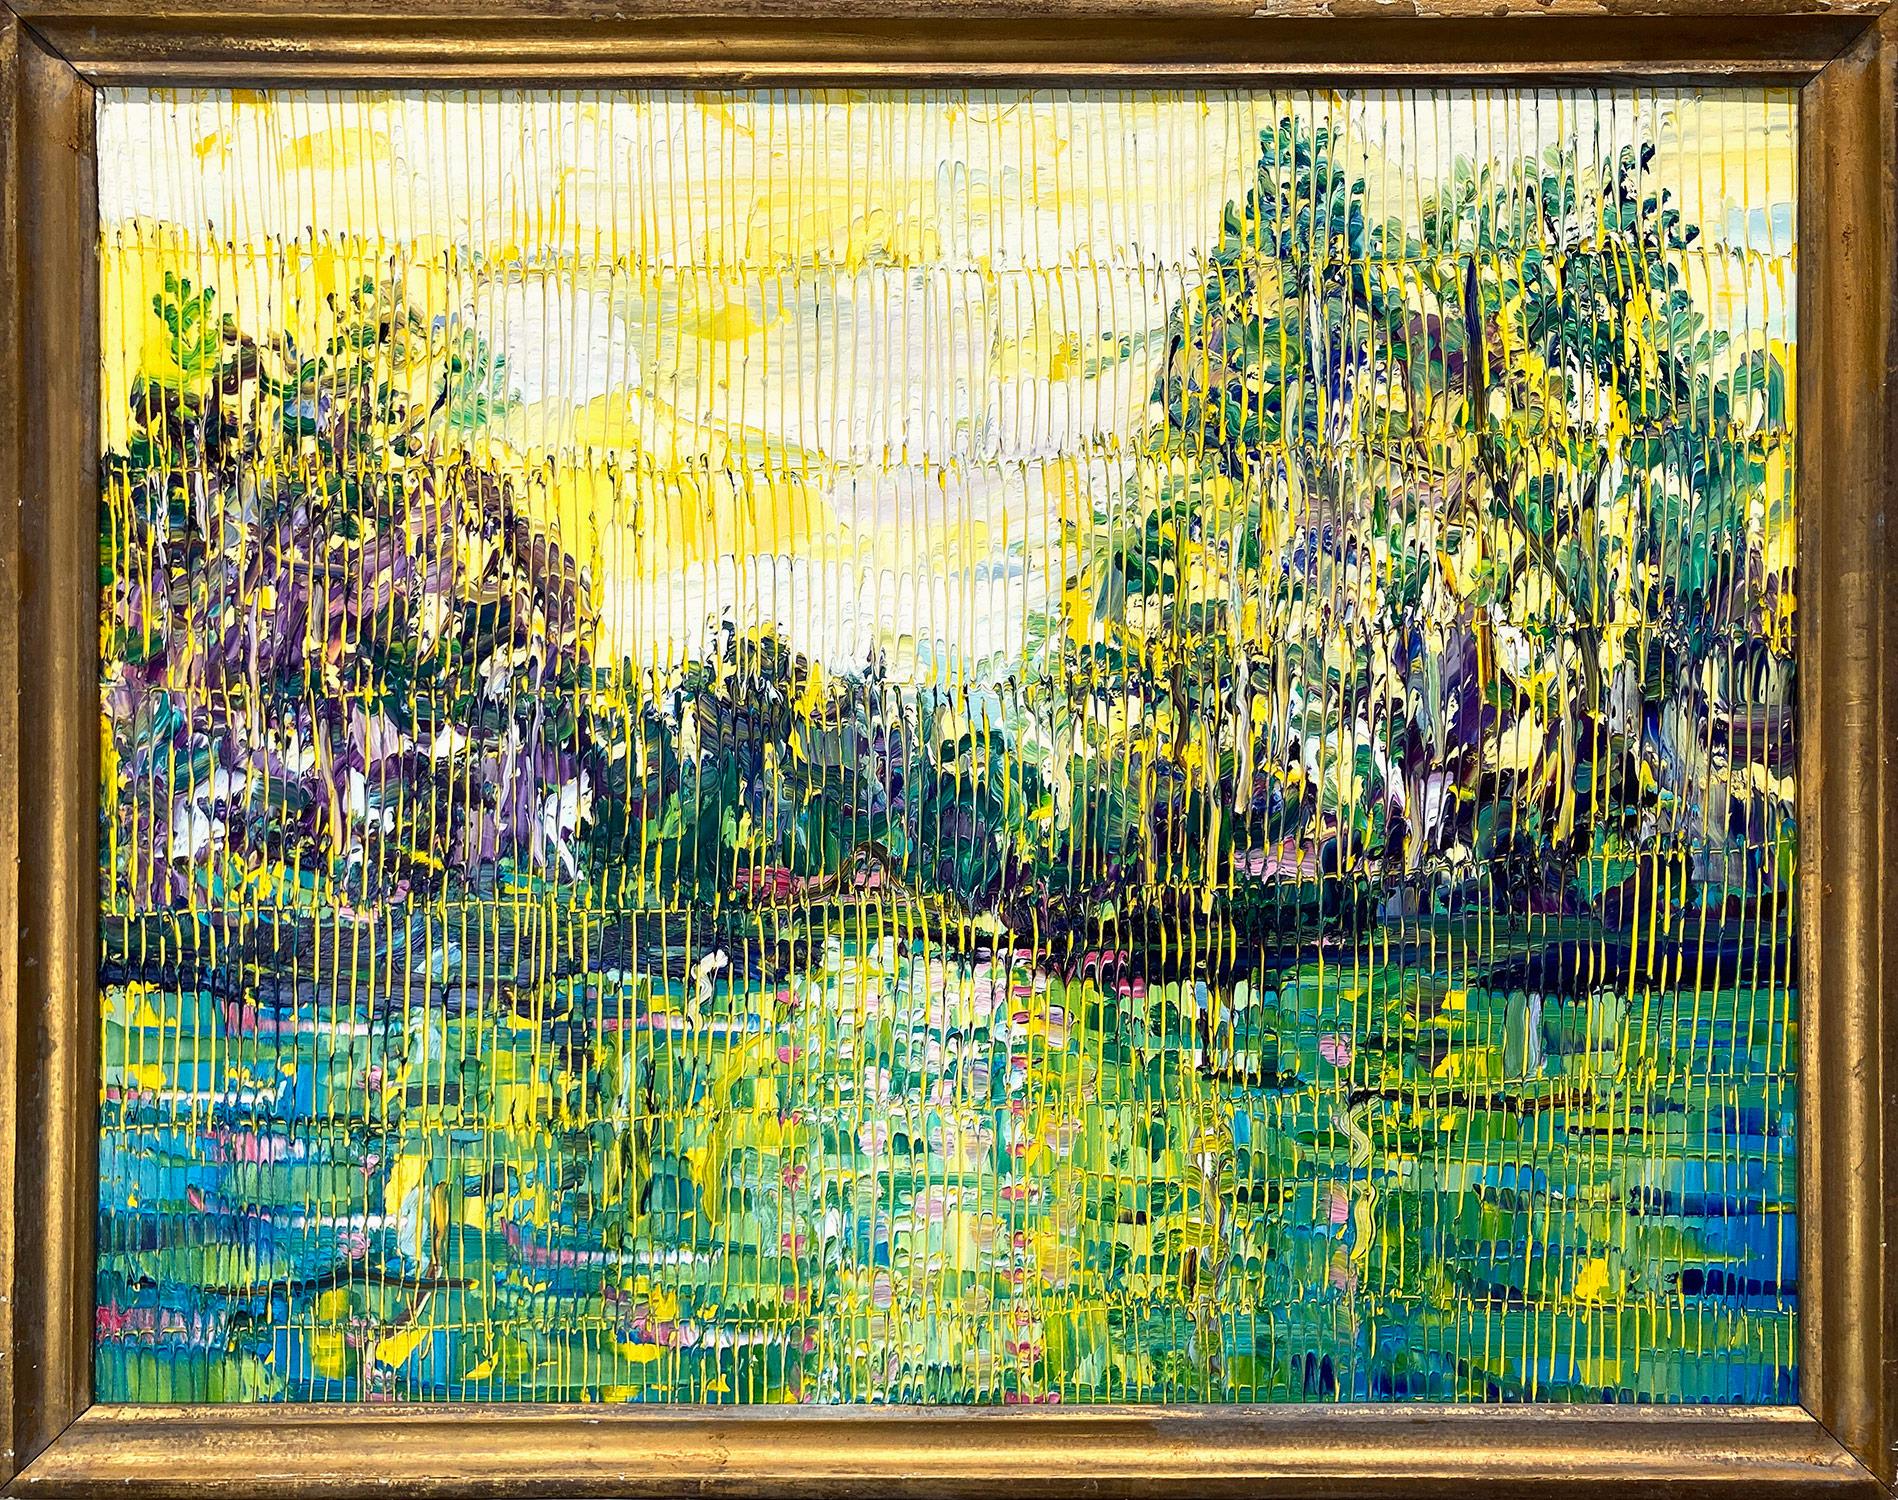 Hunt Slonem Abstract Painting - "Bayou Blue" Blue Yellow & Green toned Landscape Contemporary Oil Painting 